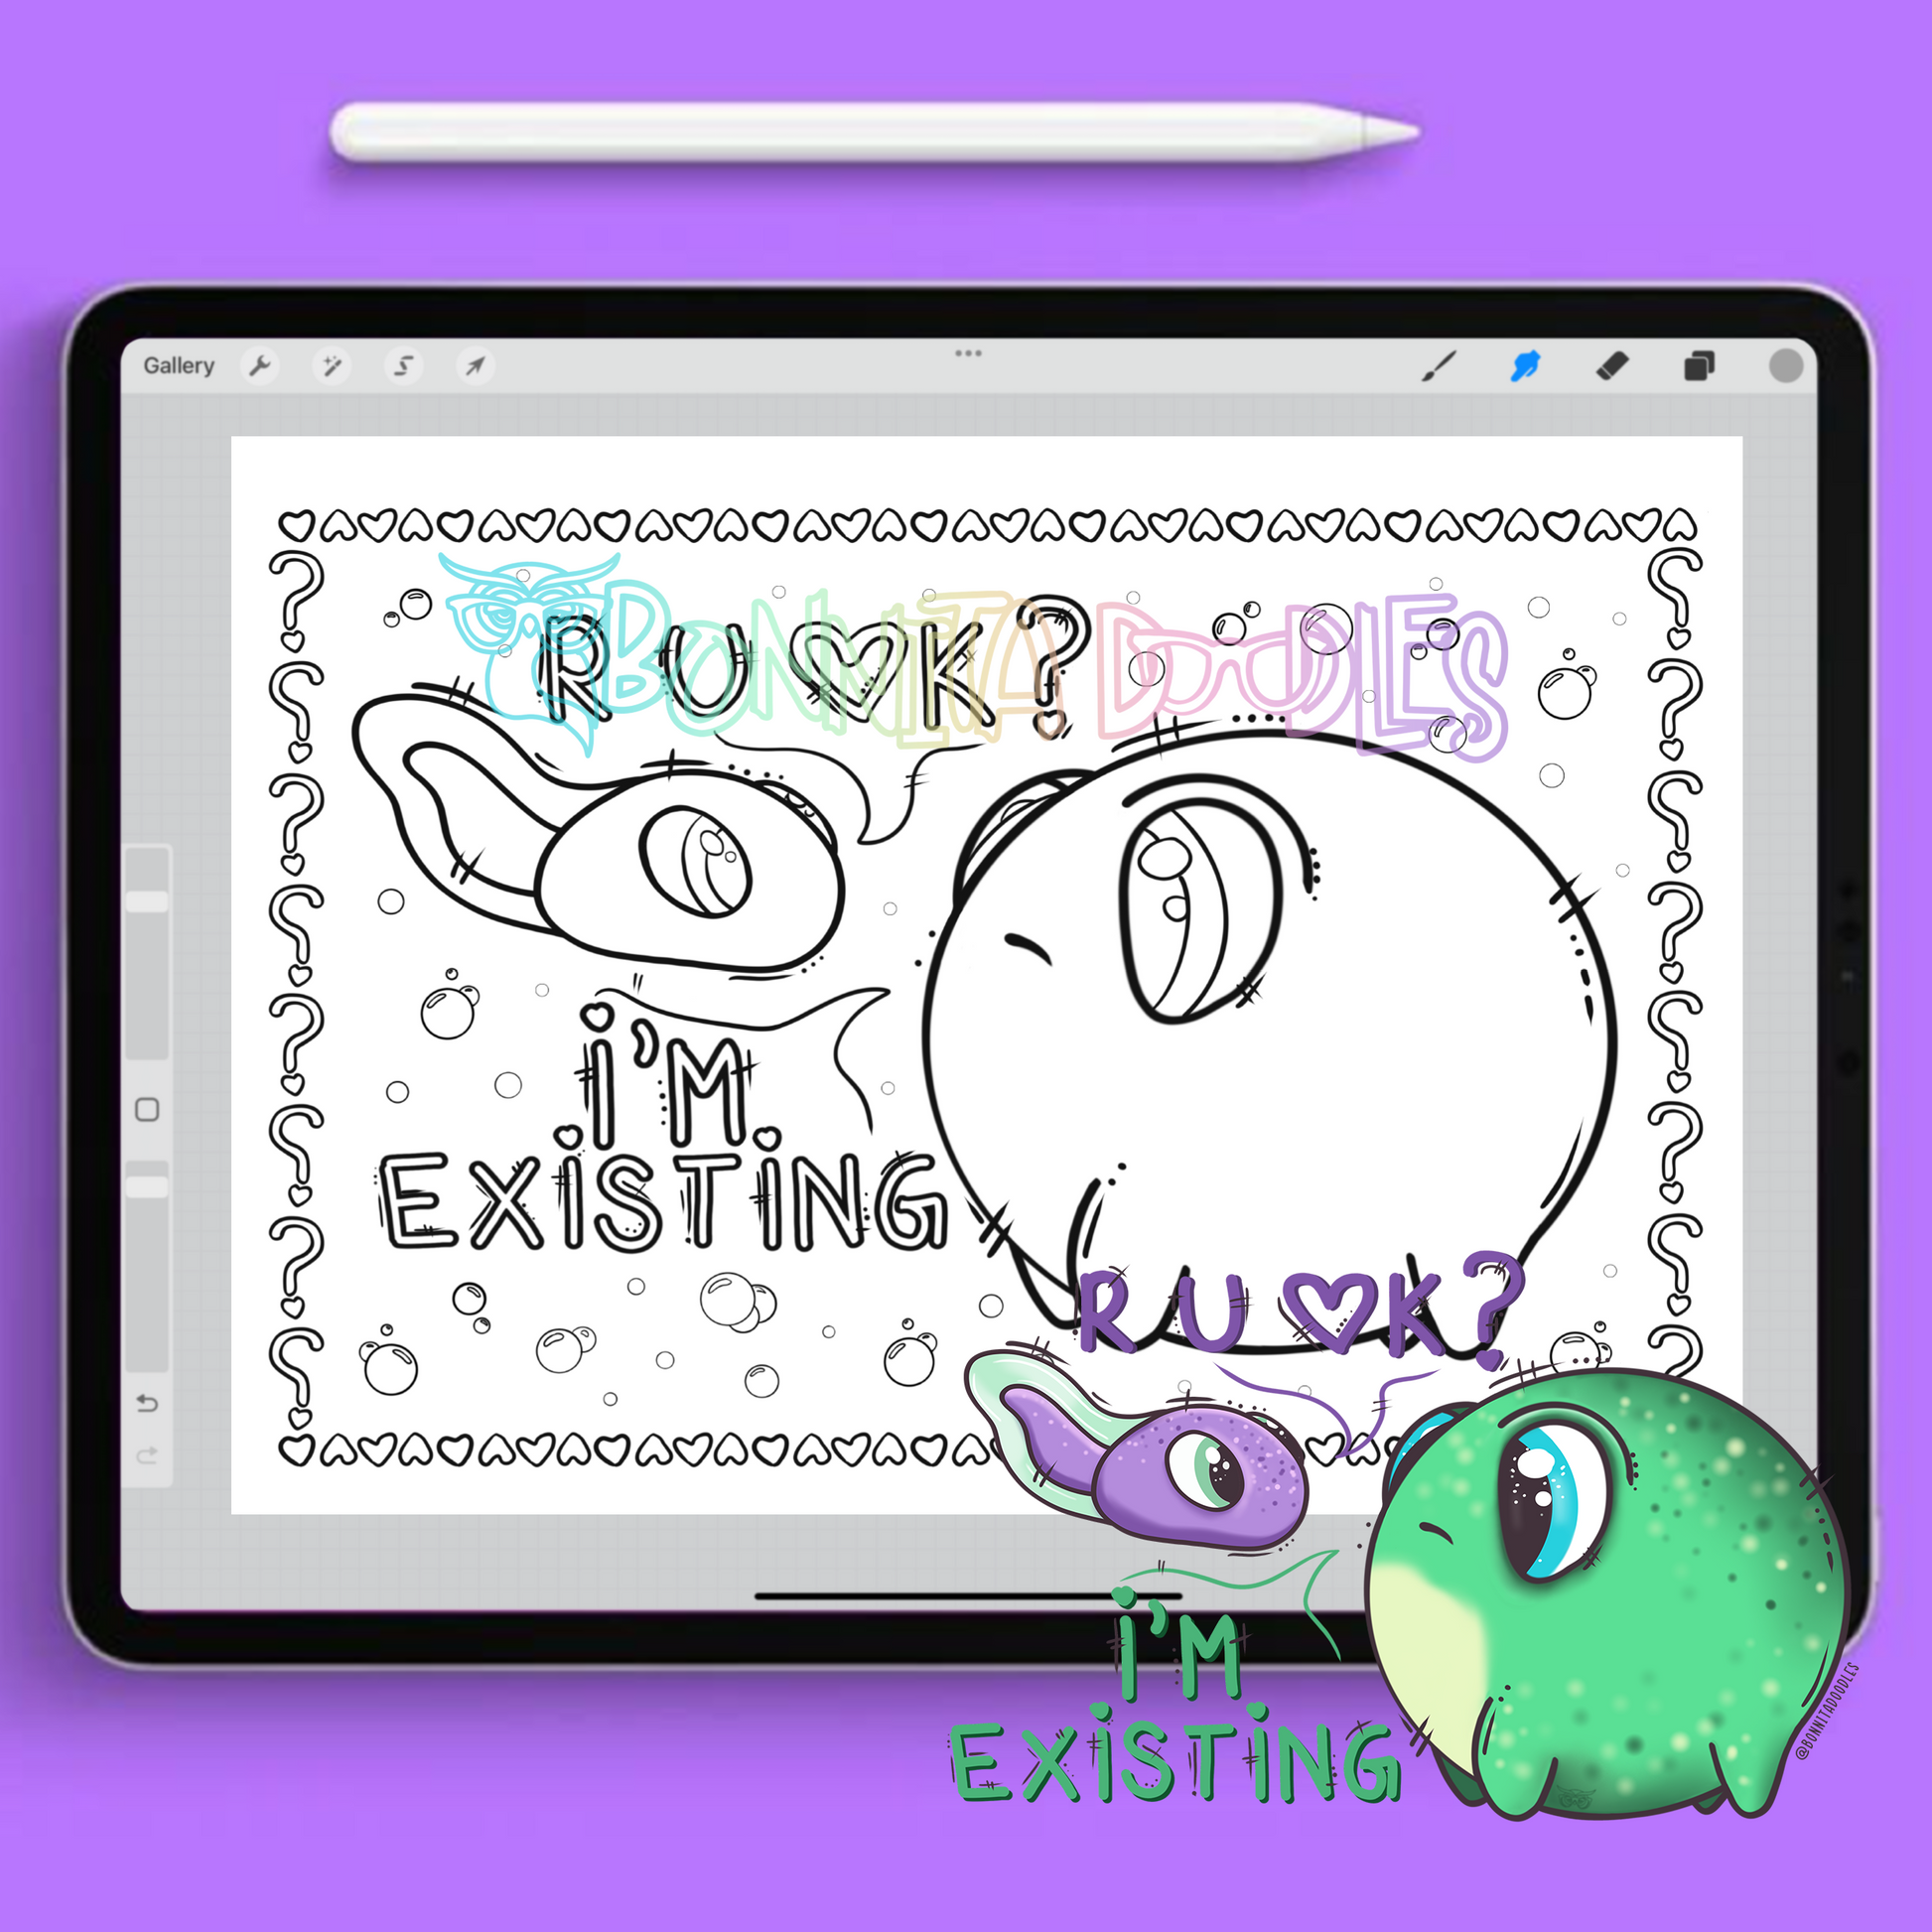 Mental health colouring sheet on a tablet with the full colour character in front. Tadpole asking 'R U Ok?' and the frog responding 'I'm existing'